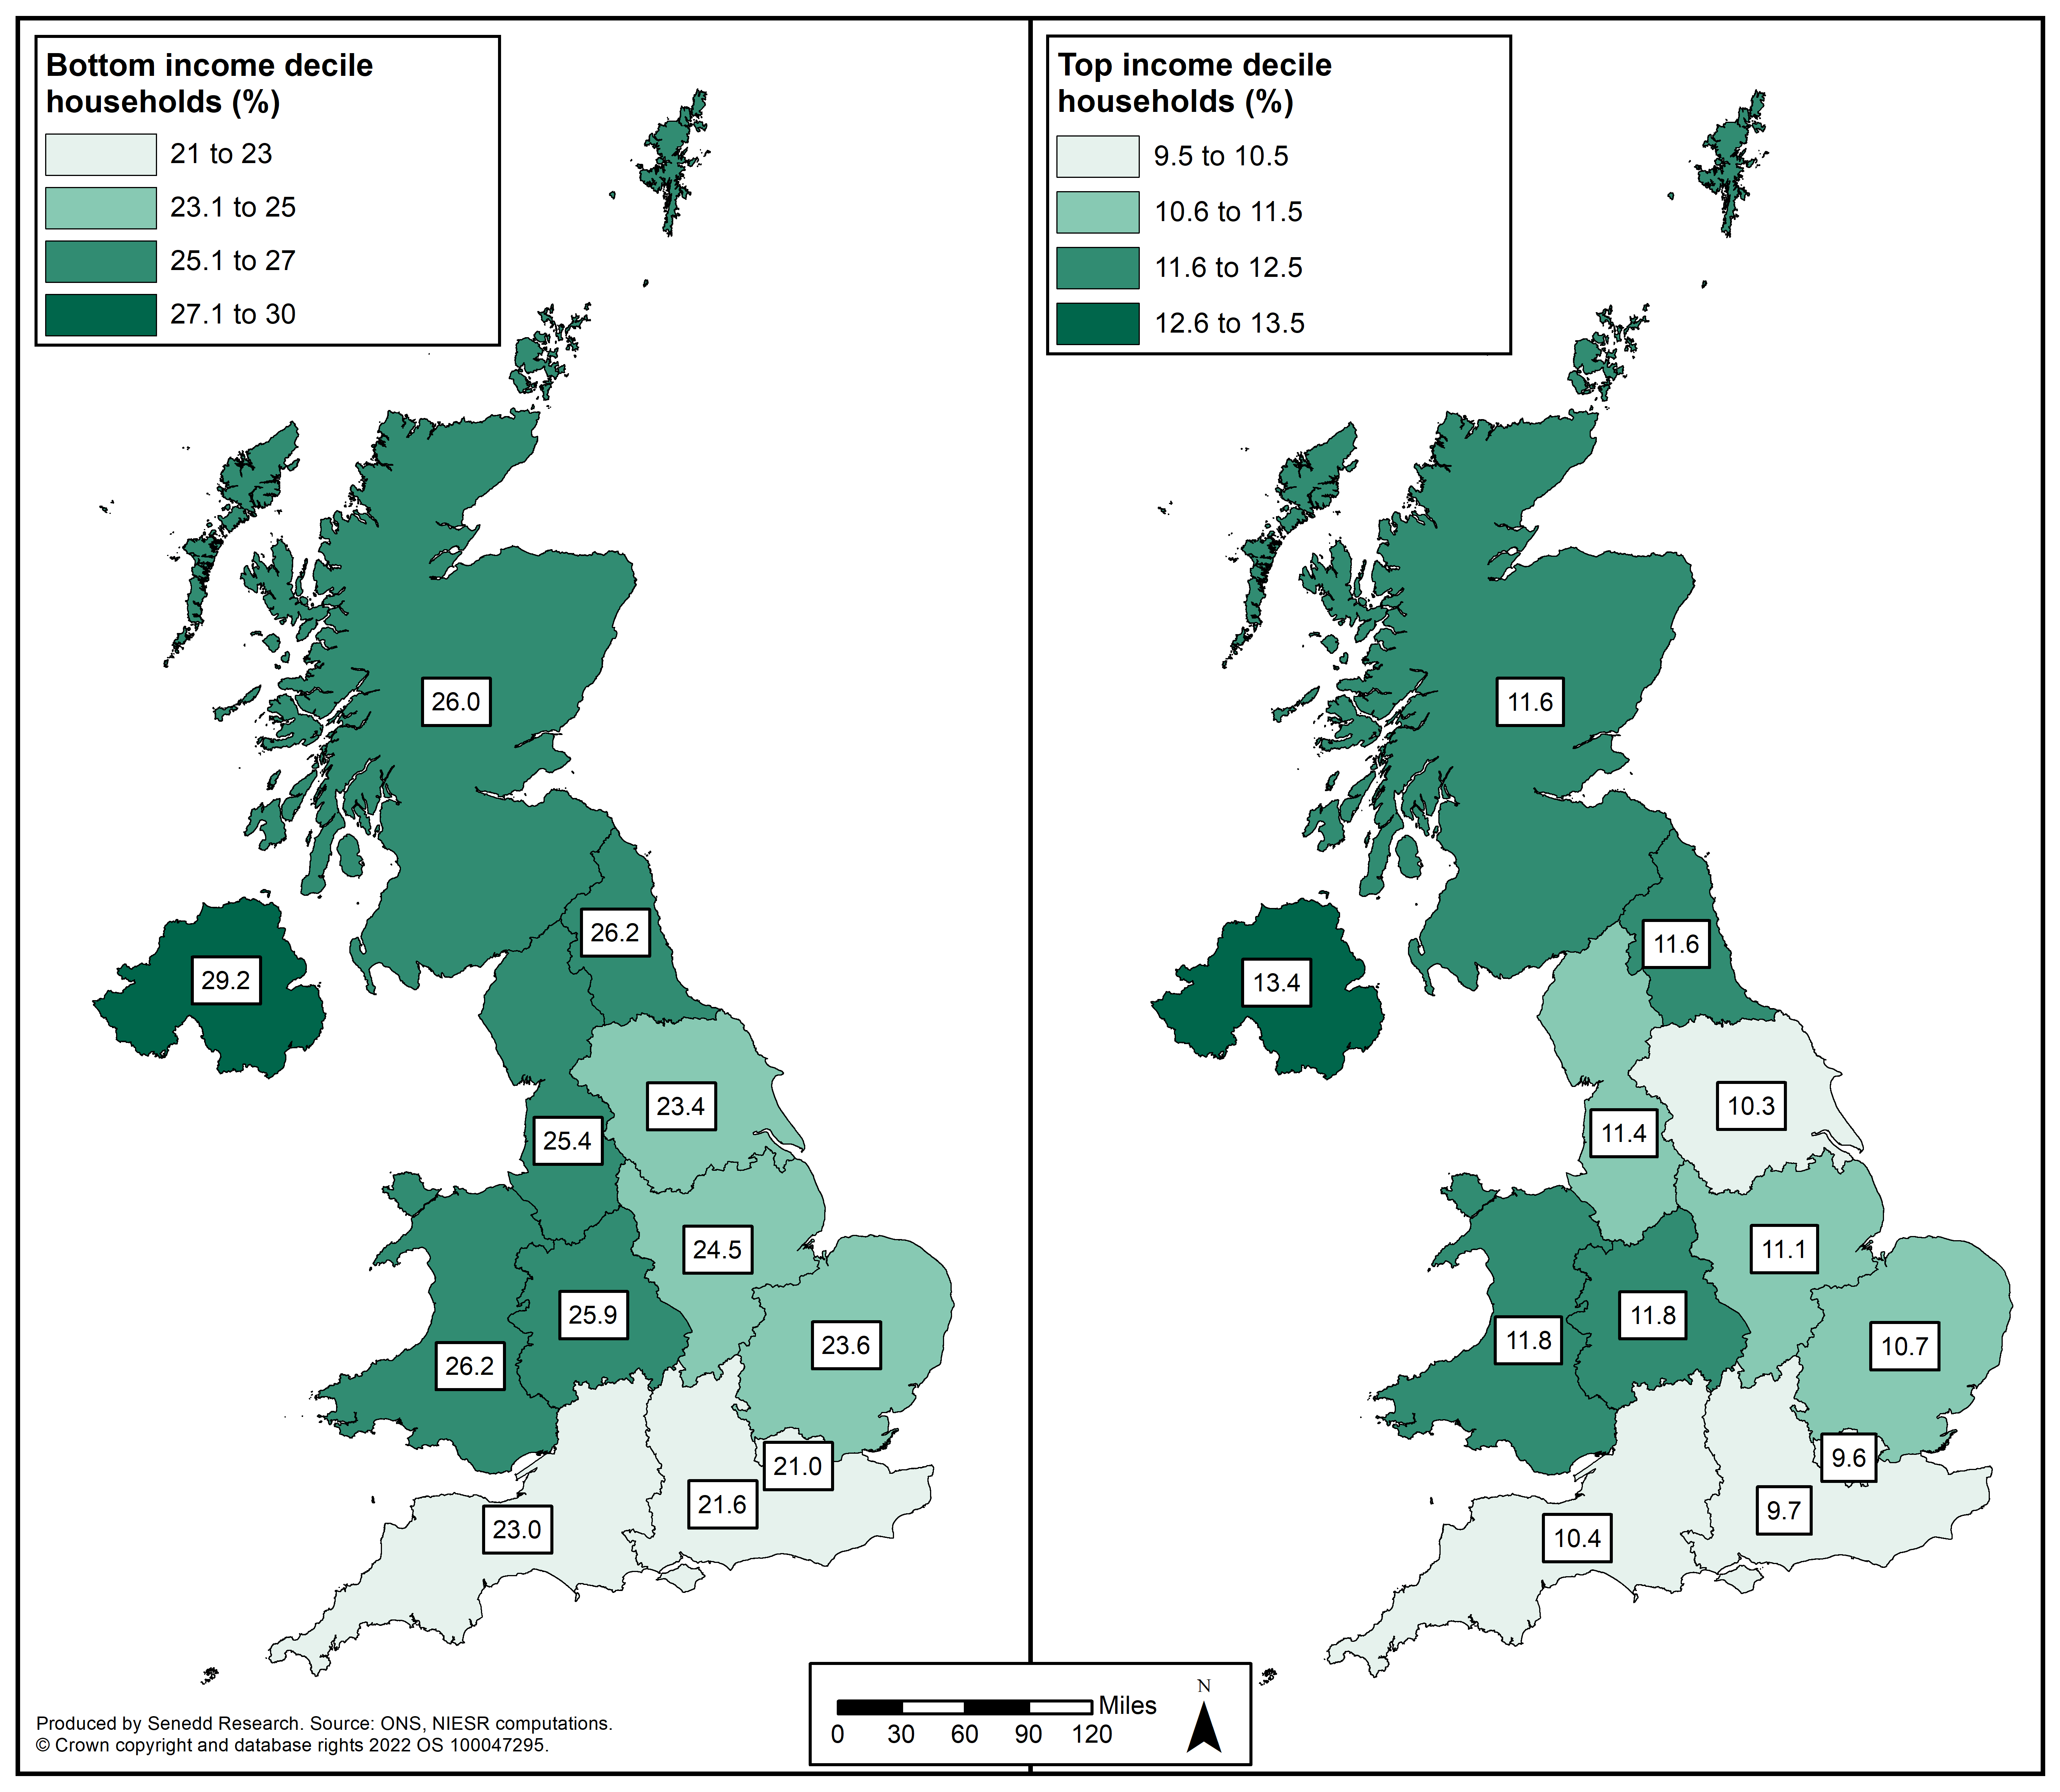 Bottom income decile households – North East England 26.2%; North West England 25.4%; Yorkshire and the Humber 23.4%; East Midlands 24.5%; West Midlands 25.9%; East of England 23.6%; South West England 23.0%; London 21.0%, South East England 21.6%; Wales 26.2%; Scotland 26.0%; Northern Ireland 29.2%. Top income decile households - North East England 11.6%; North West England 11.4%; Yorkshire and the Humber 10.3%; East Midlands 11.1%; West Midlands 11.8%; East of England 10.7%; South West England 10.4%; London 9.6%, South East England 9.7%; Wales 11.8%; Scotland 11.6%; Northern Ireland 13.4%.